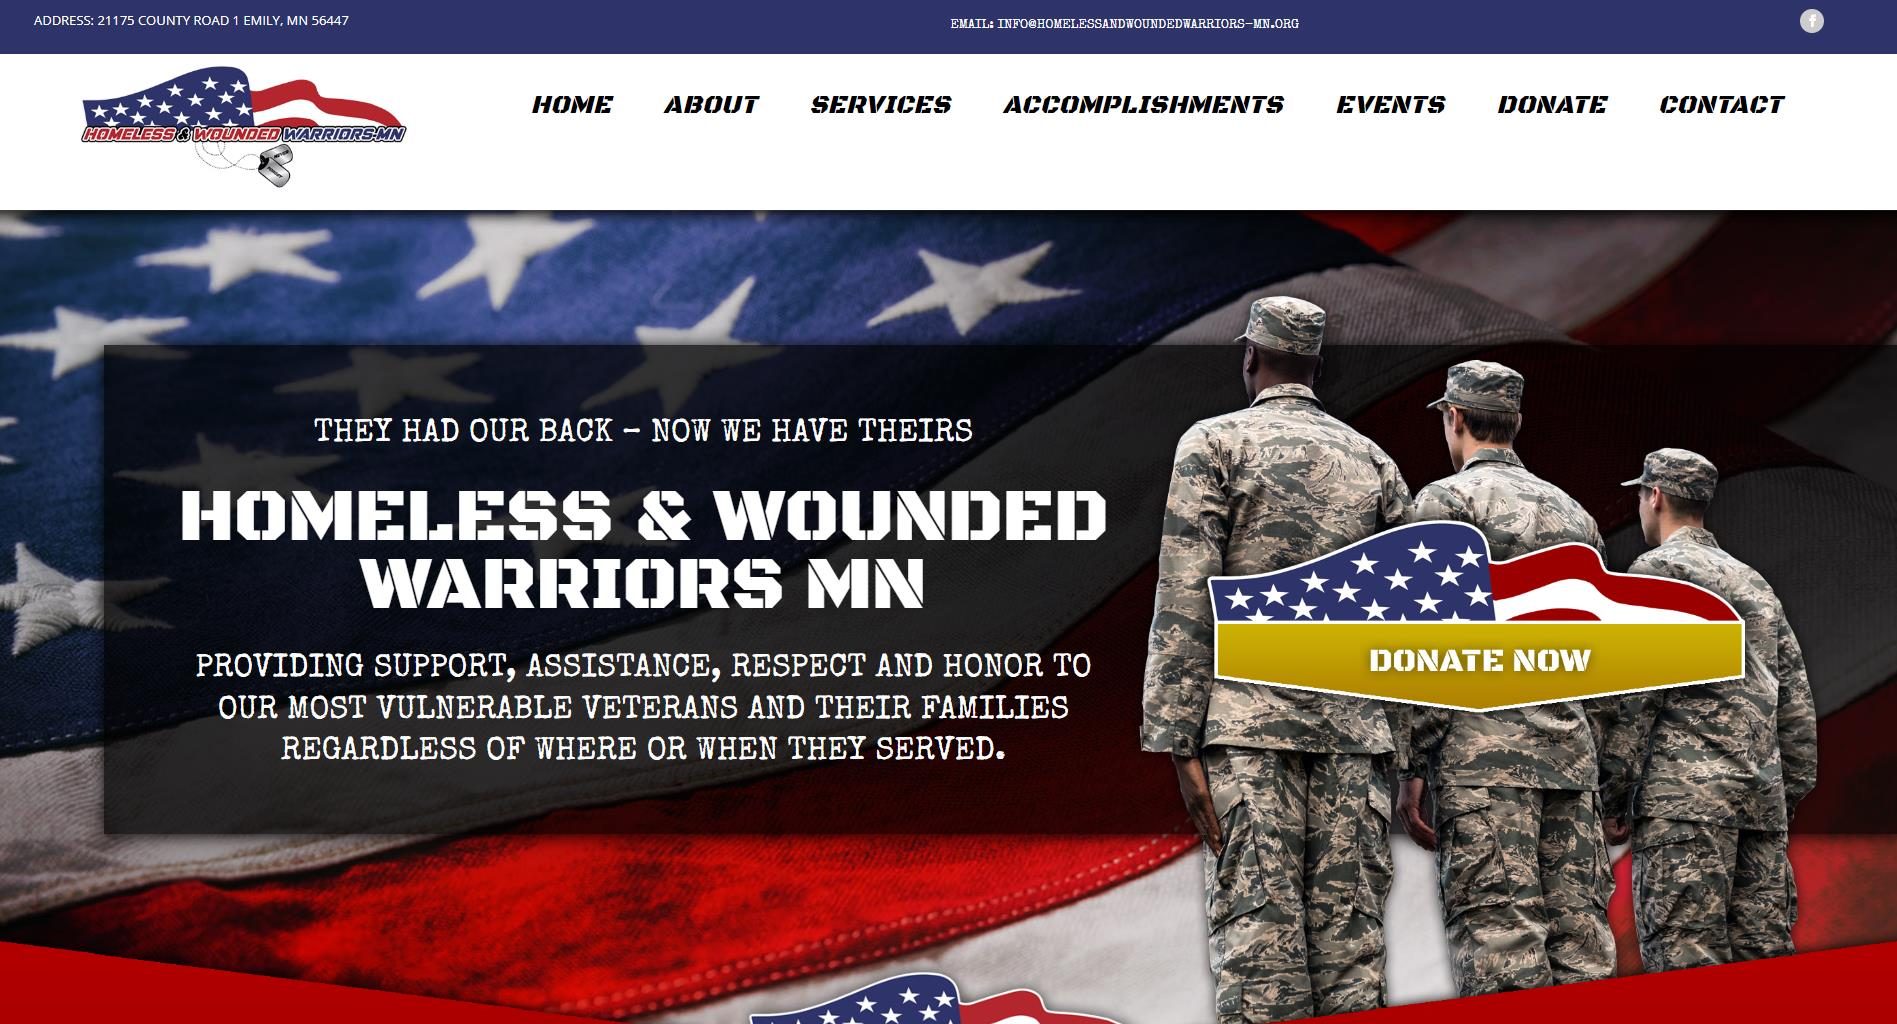 Homeless & Wounded Warriors website